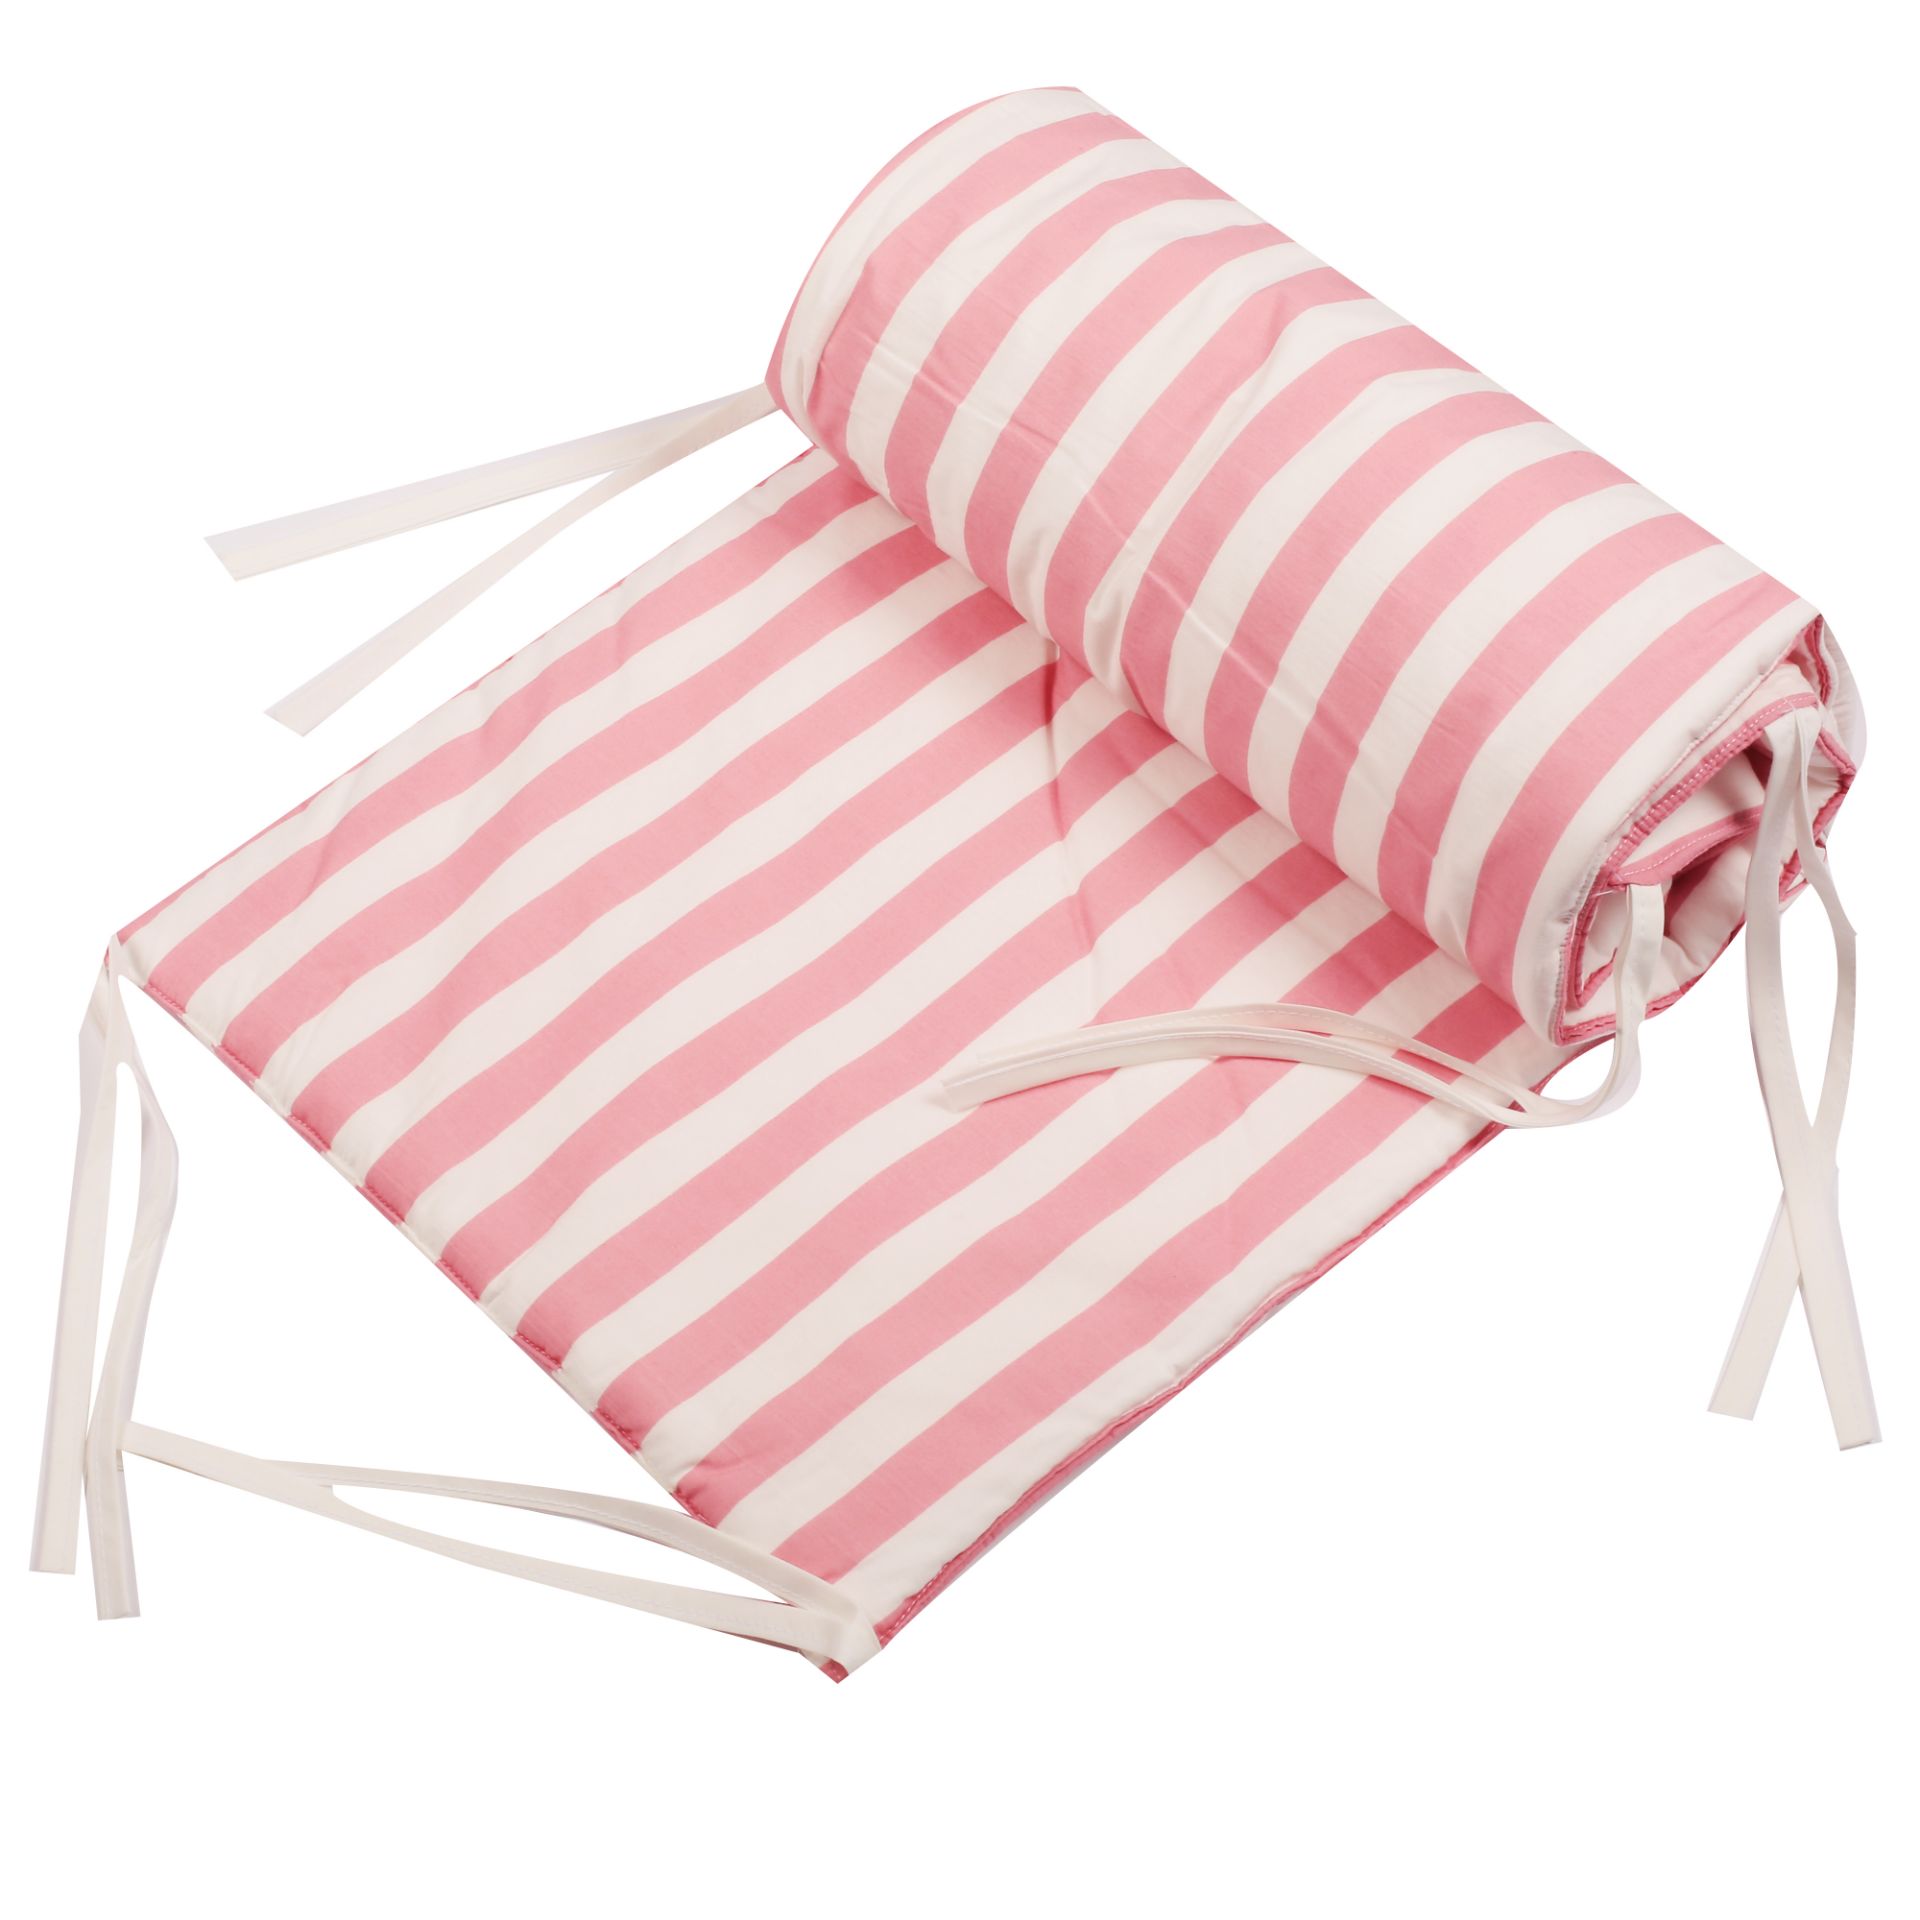 36 Baby Padded Cot Liners | Crib Rail Cover One-Piece Bumper Cot Bumper (RRP 29.99 Each) - Image 15 of 17